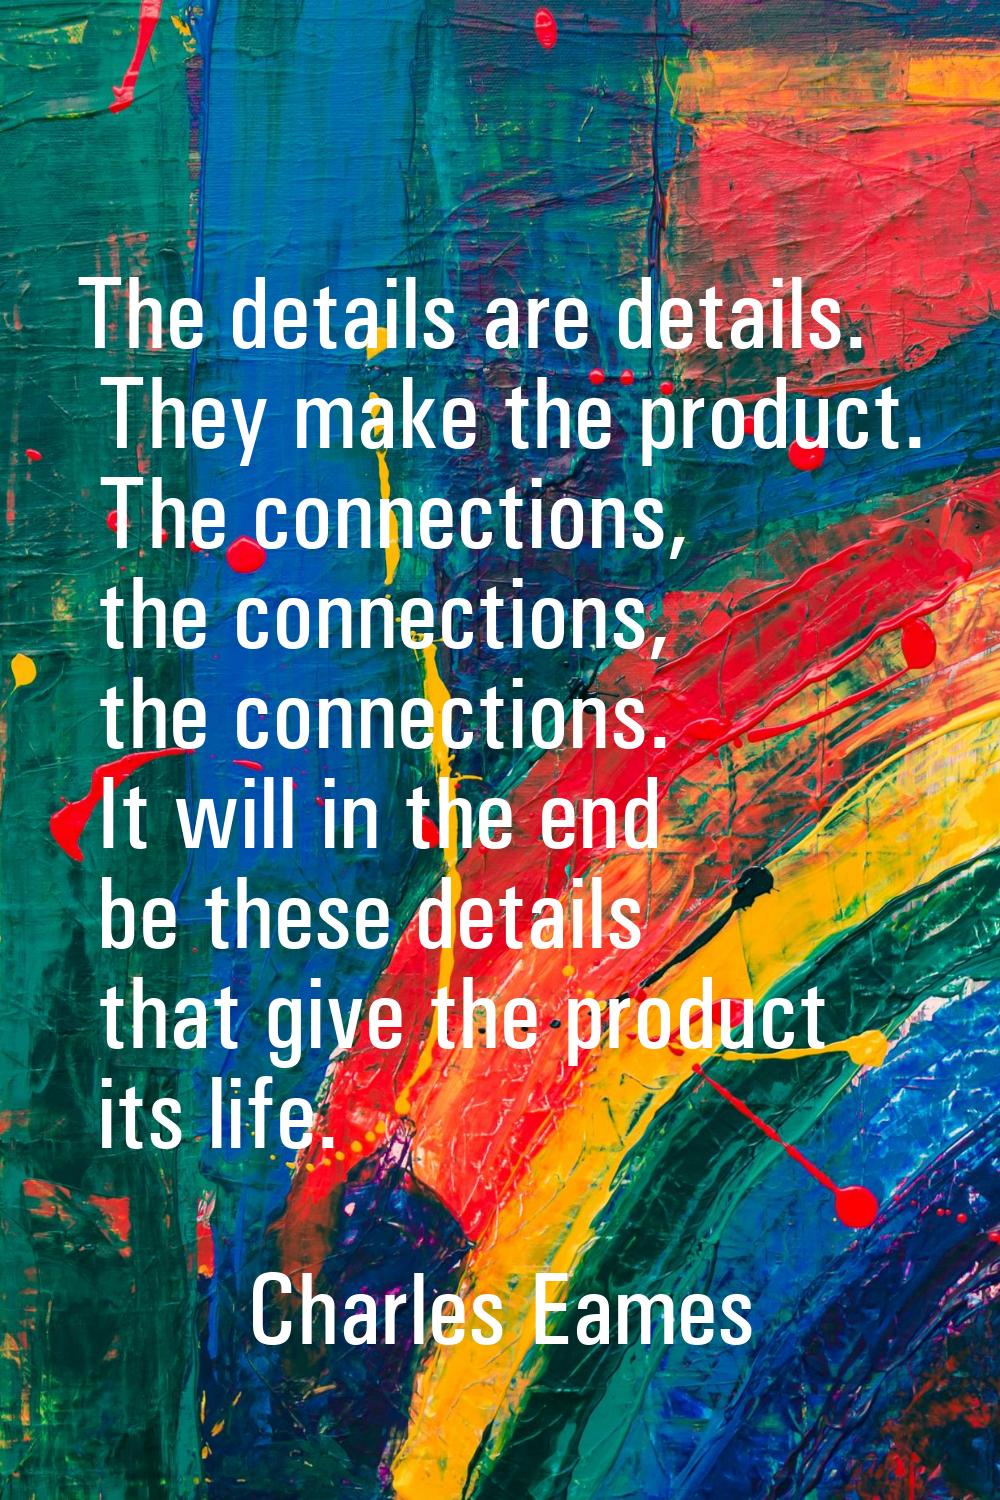 The details are details. They make the product. The connections, the connections, the connections. 